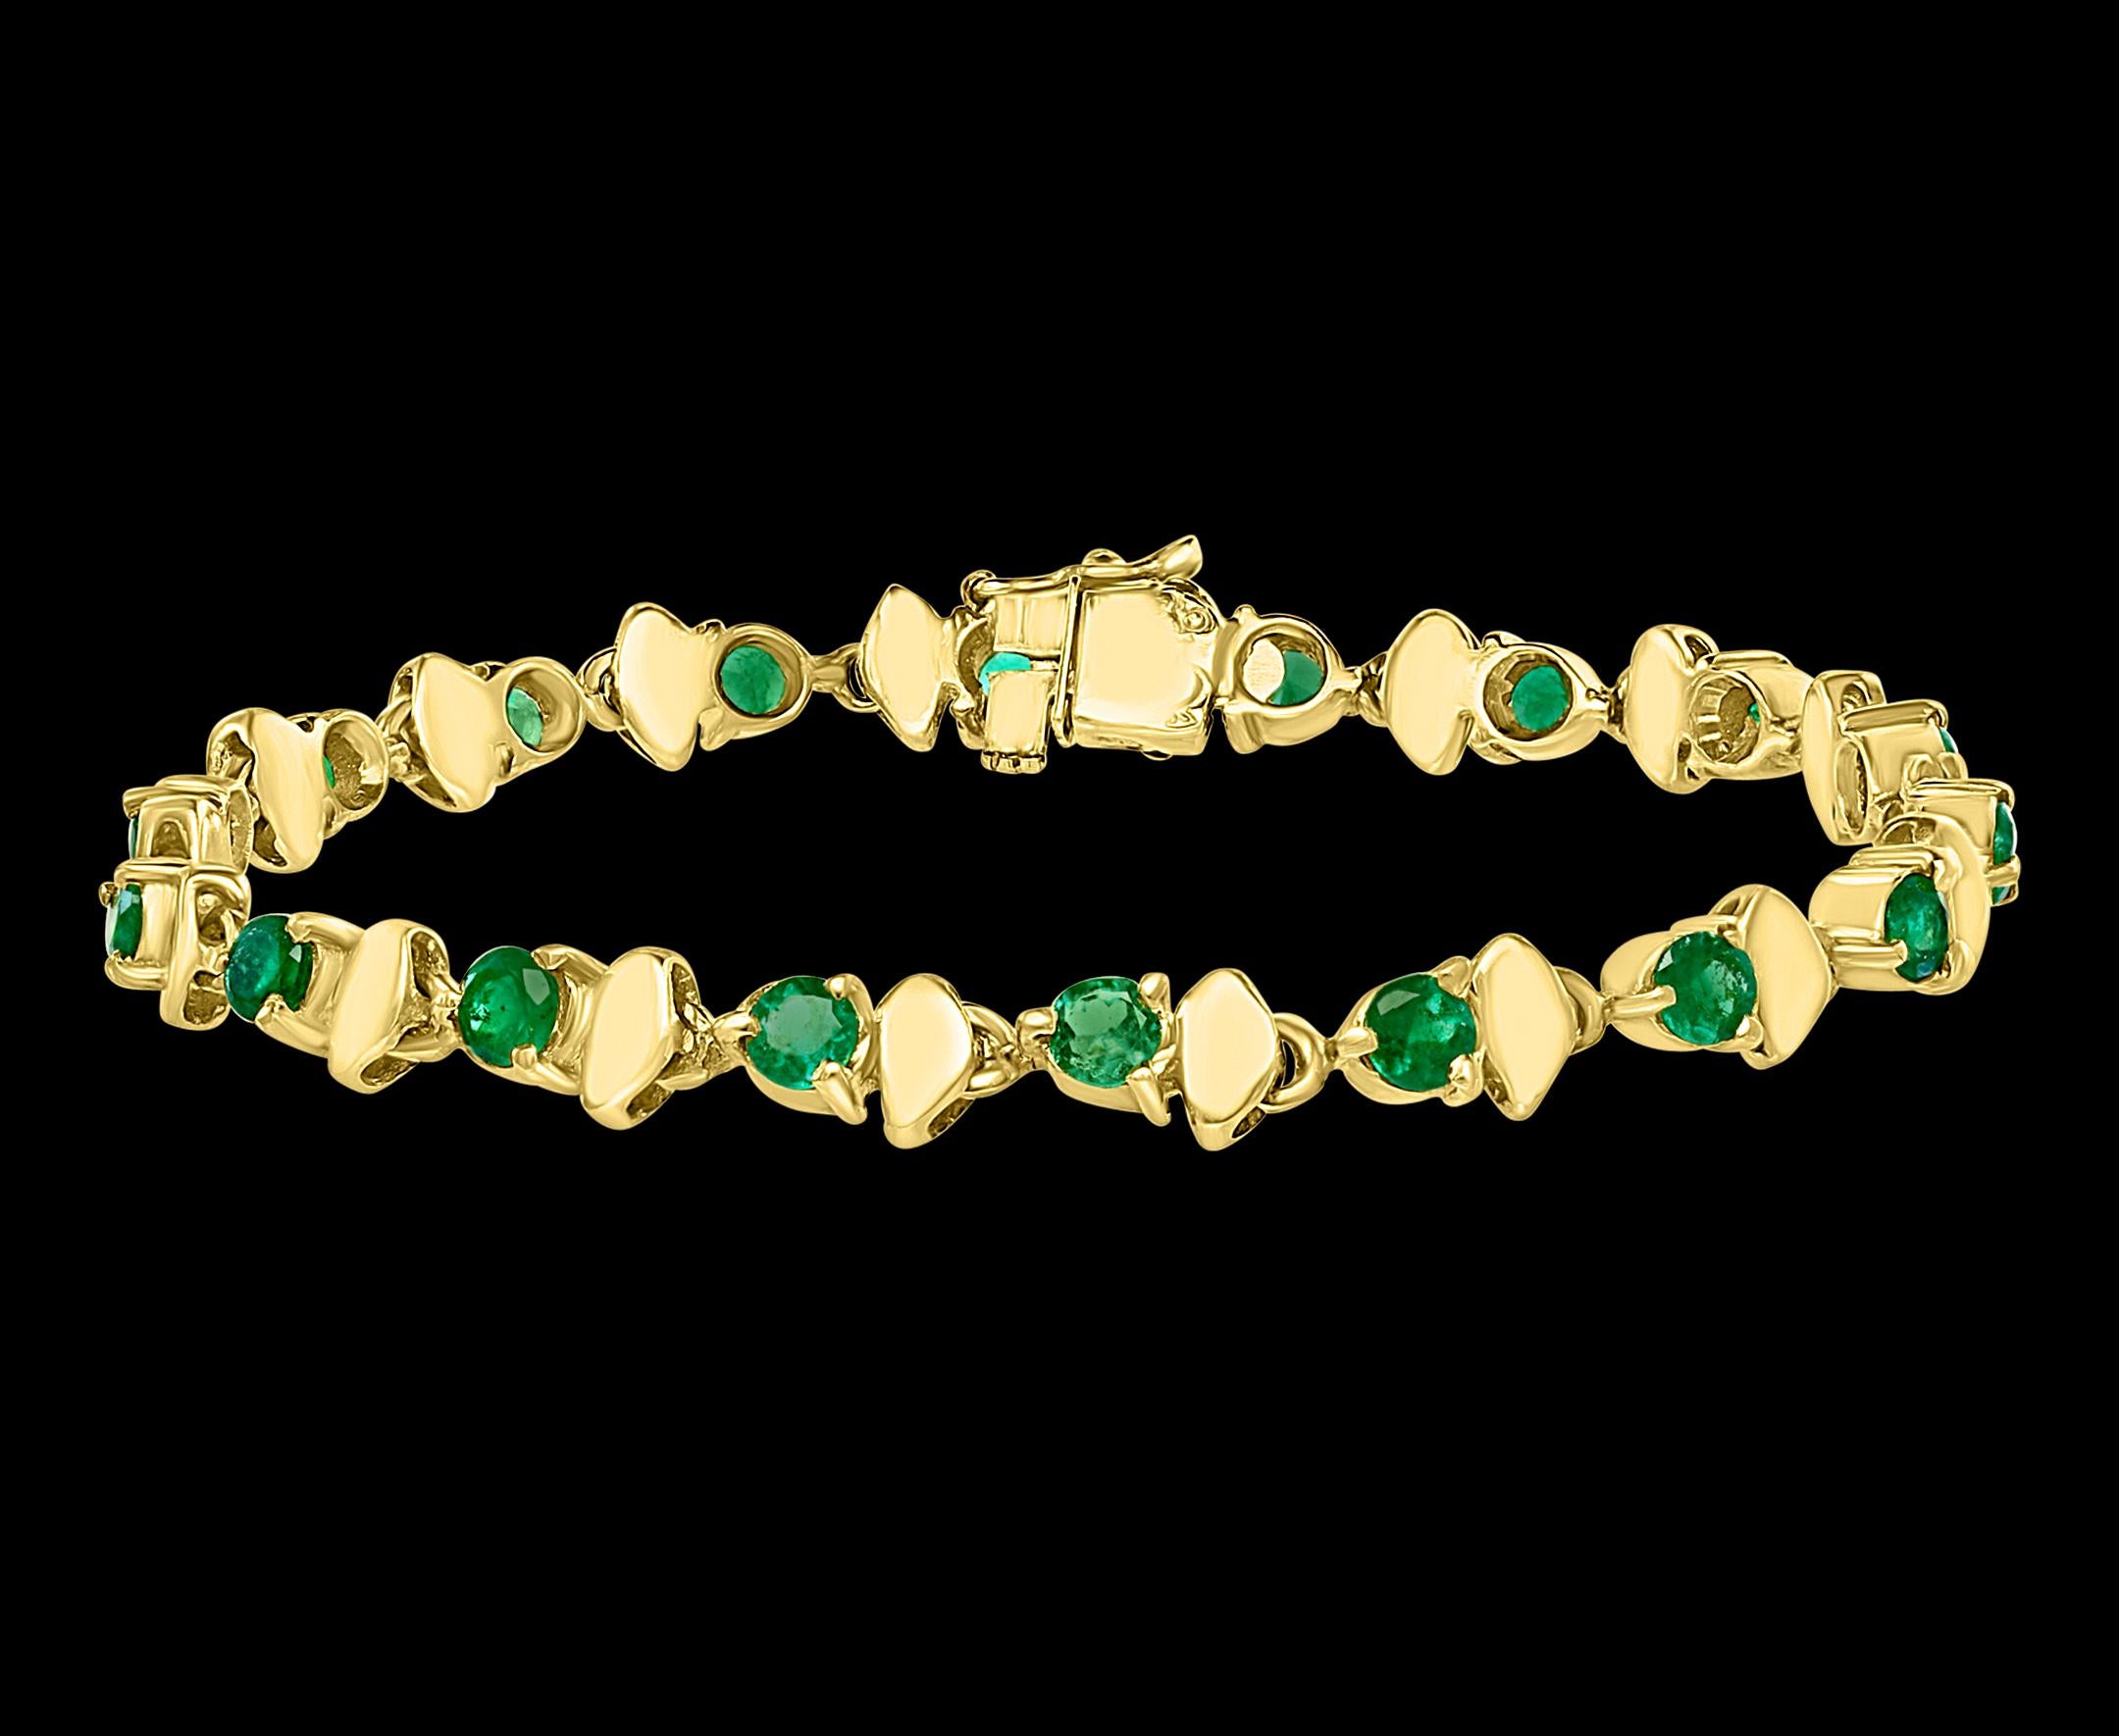  This exceptionally affordable Tennis  bracelet has  18 Round  stones of round Colombian Emeralds  . Each Emerald is spaced by a gold link.  
 Total weight of Emerald is Approximately  6 carat. Very fine quality and color of emerald.
The bracelet is